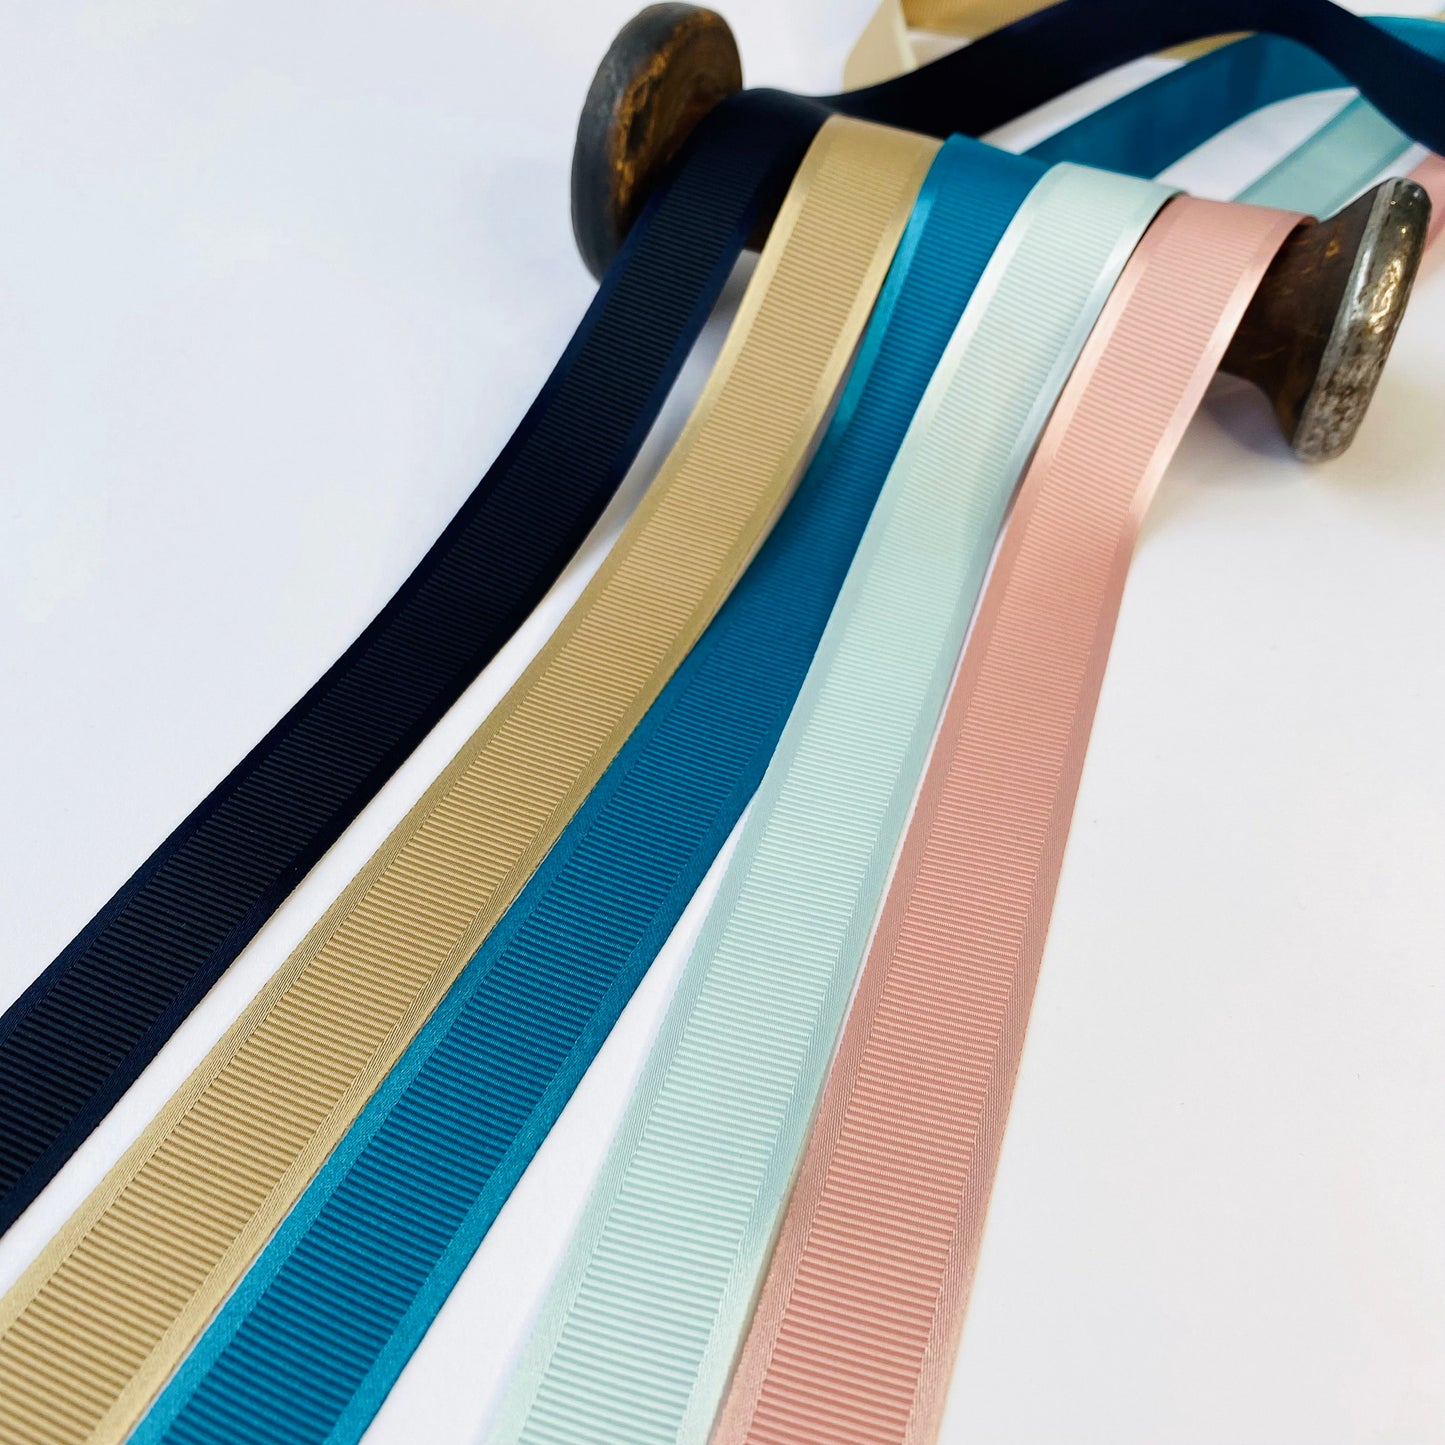 20mm Satin Edged Double Sided Grosgrain Ribbon by Le Claudel